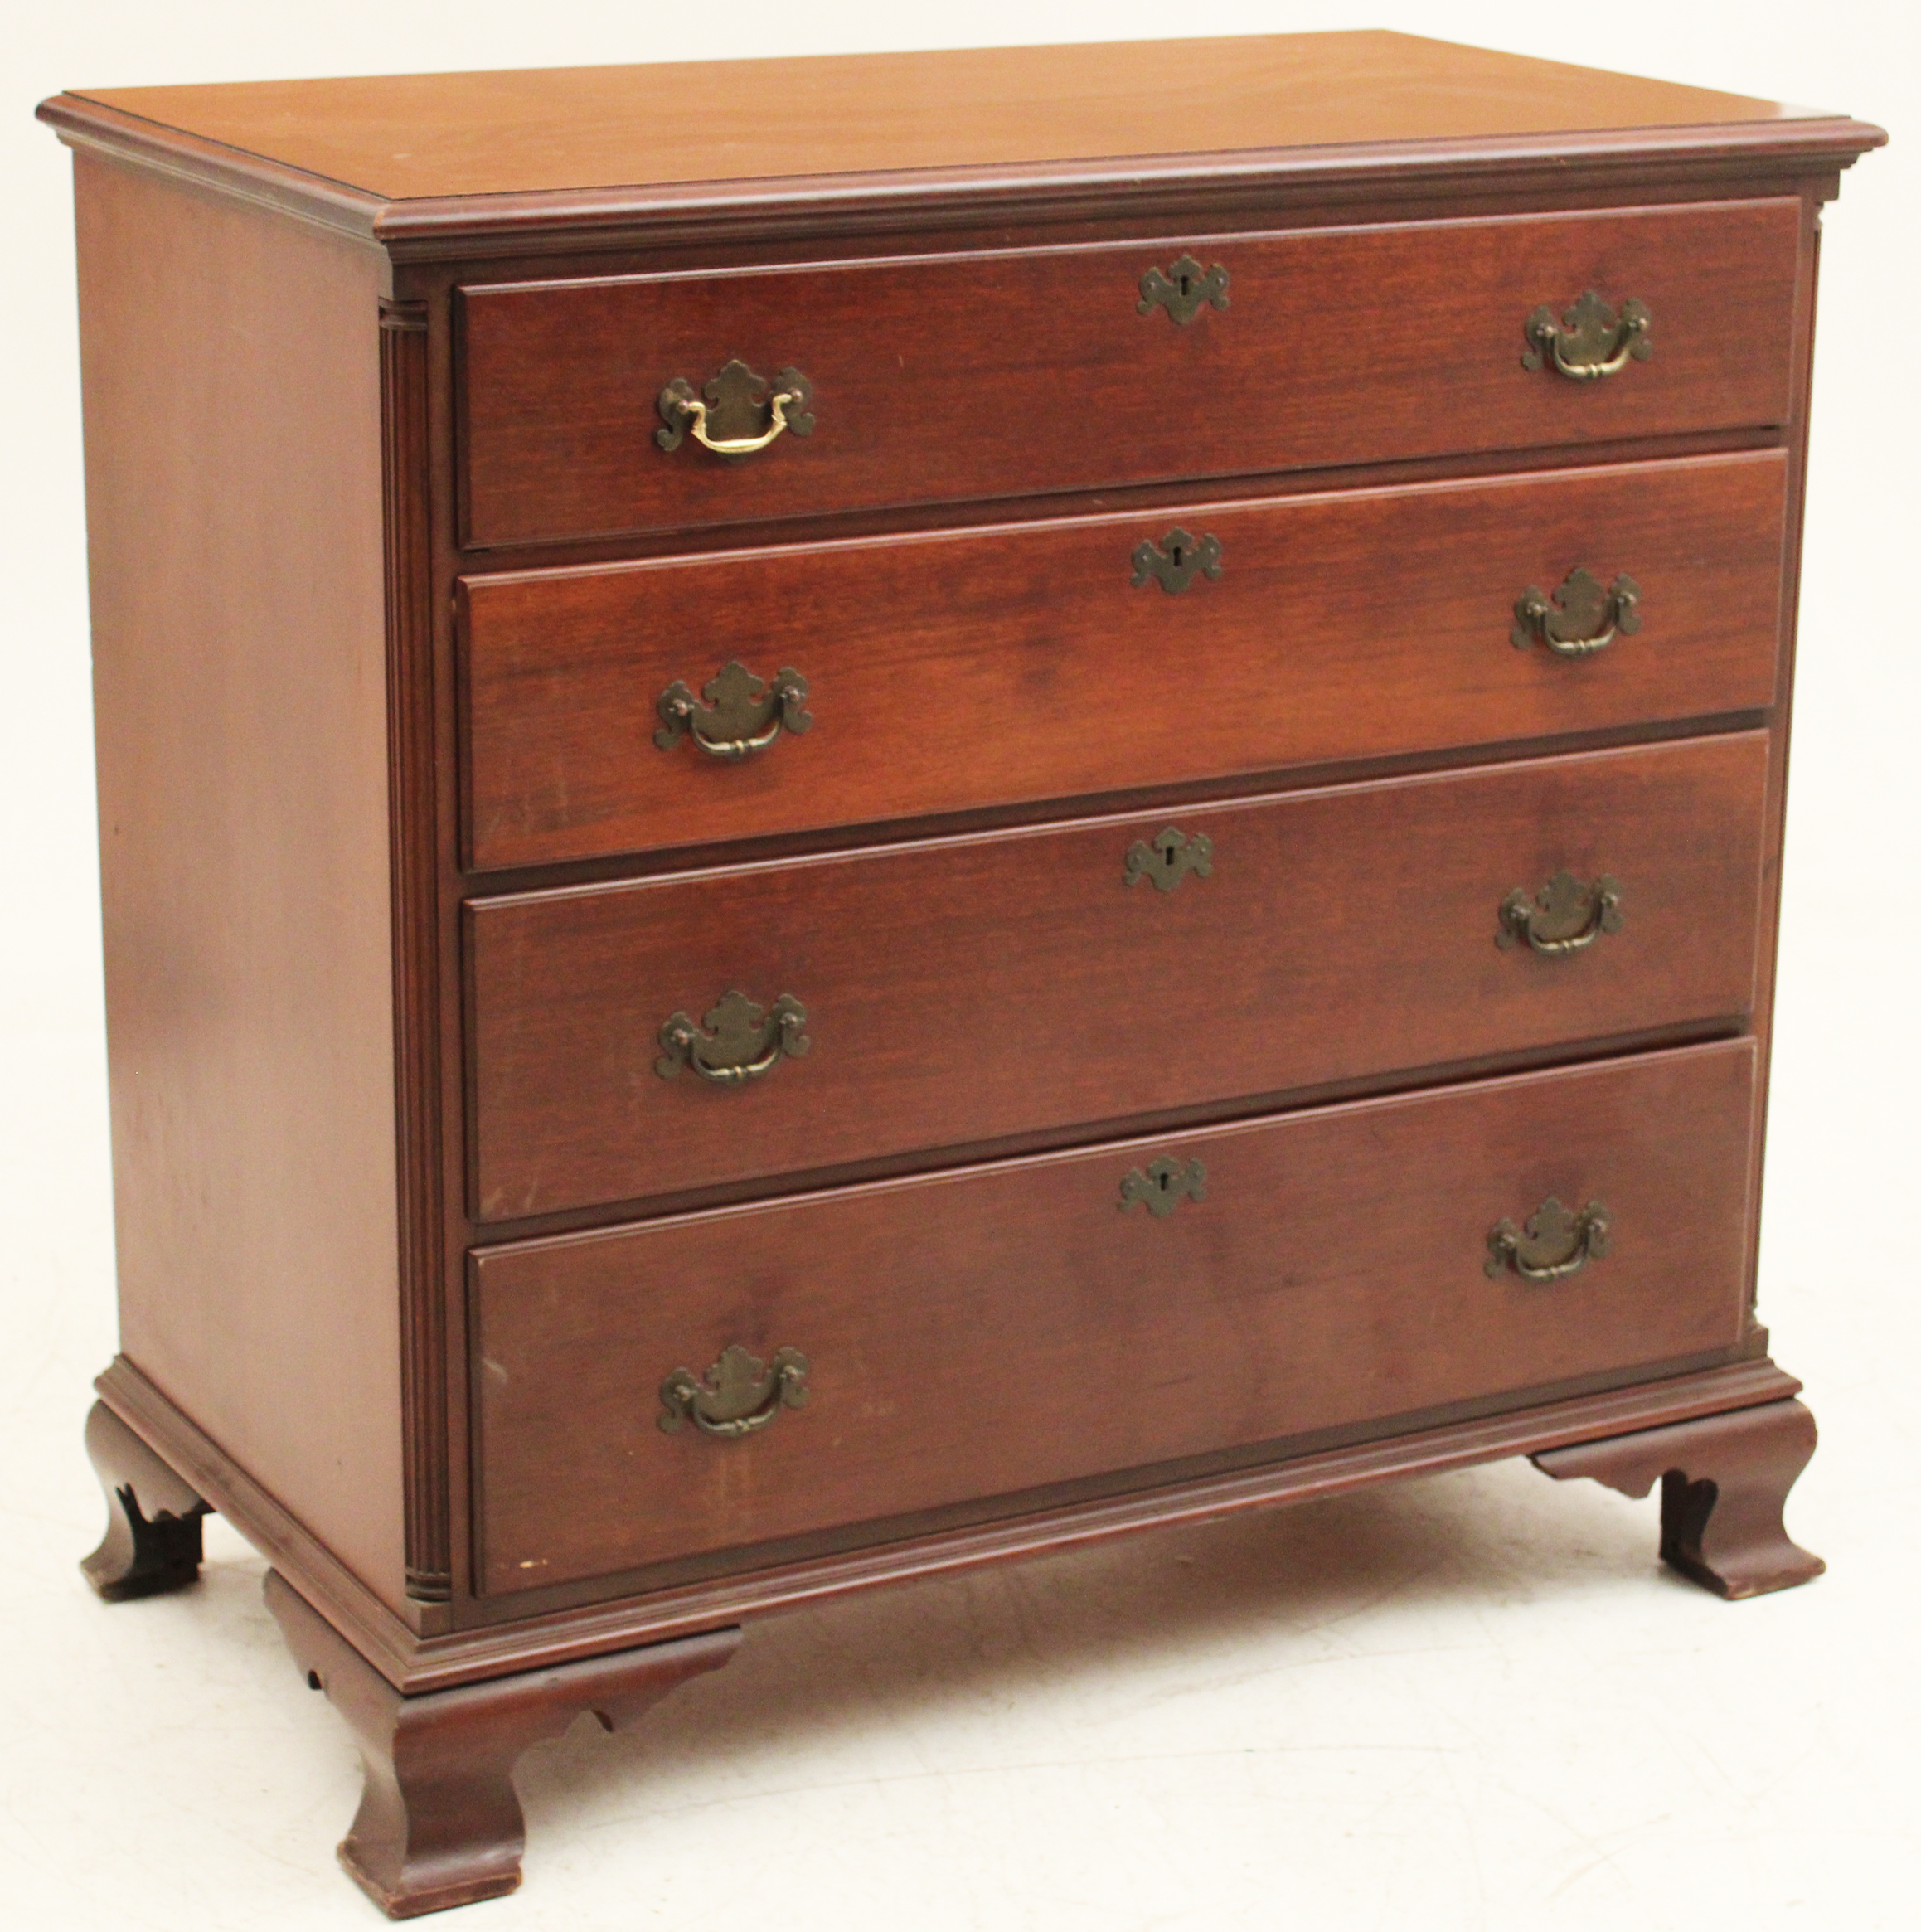 AMERICAN STYLE 4 DRAWER CHEST AMERICAN